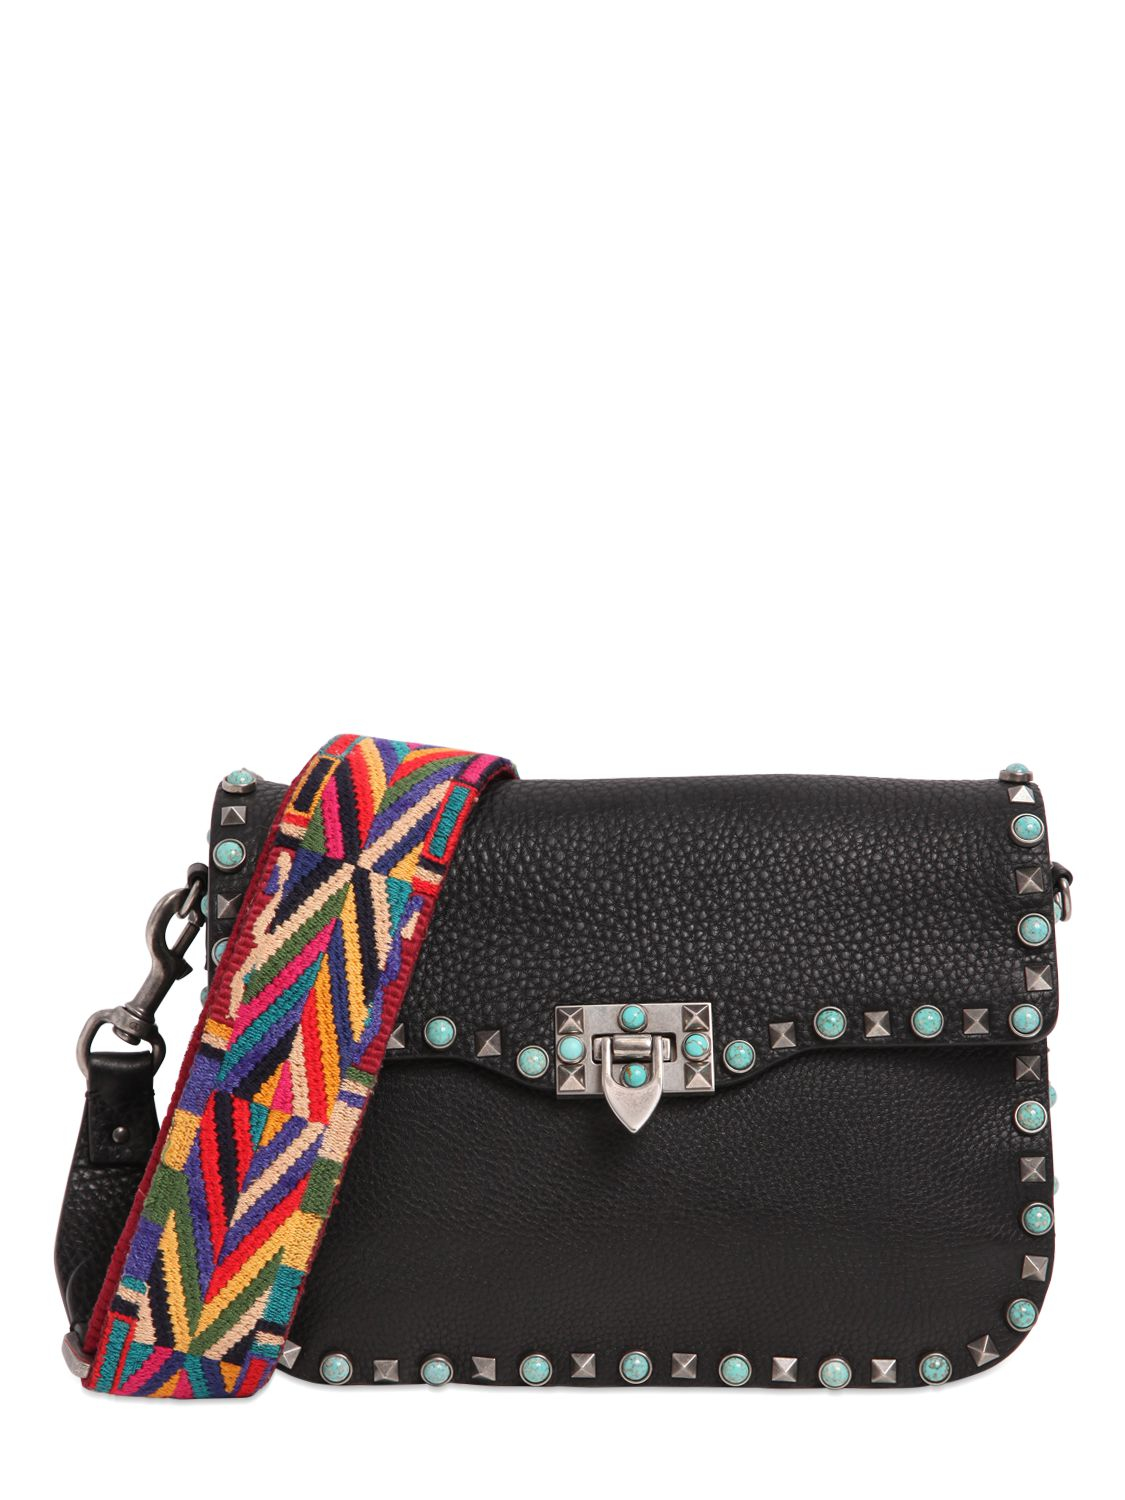 Valentino Rockstud Leather Bag With Studs & Stones in Black - Lyst